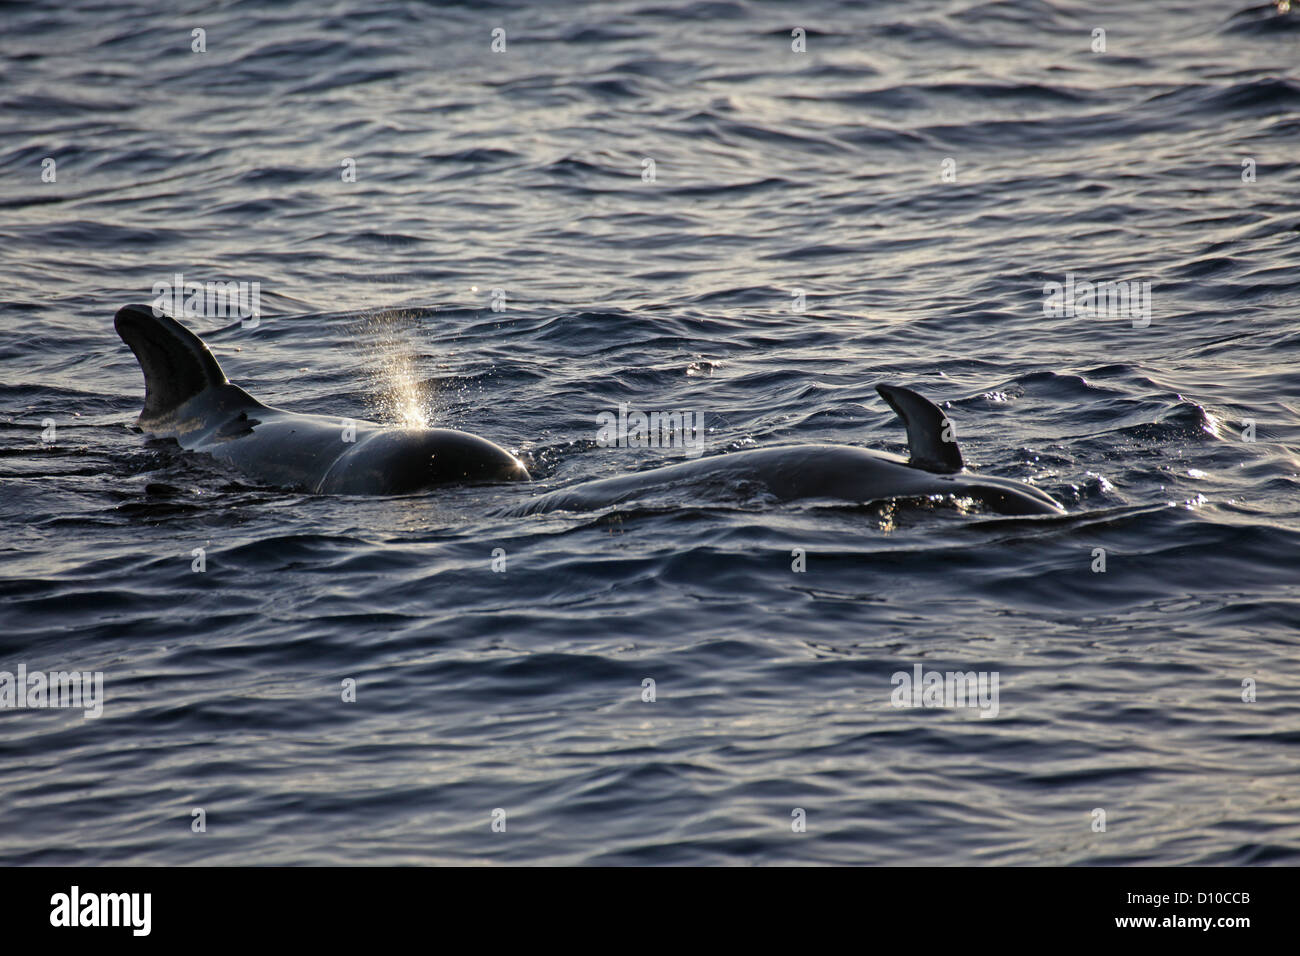 Two short-finned pilot whales play at the water surface, La Gomera, Canary Islands Stock Photo